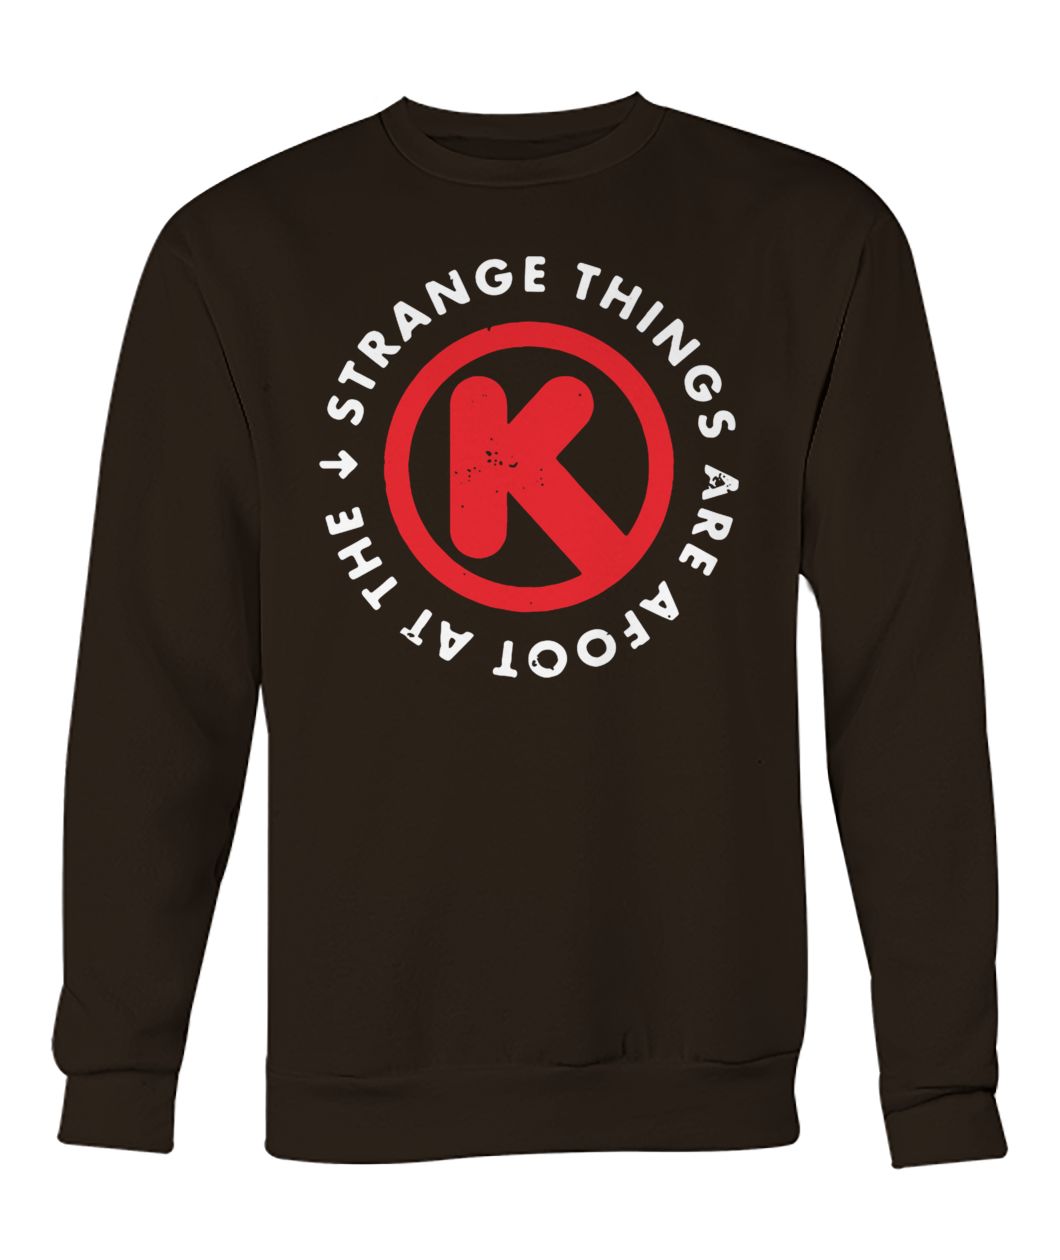 Strange things are afoot at the circle-k crew neck sweatshirt